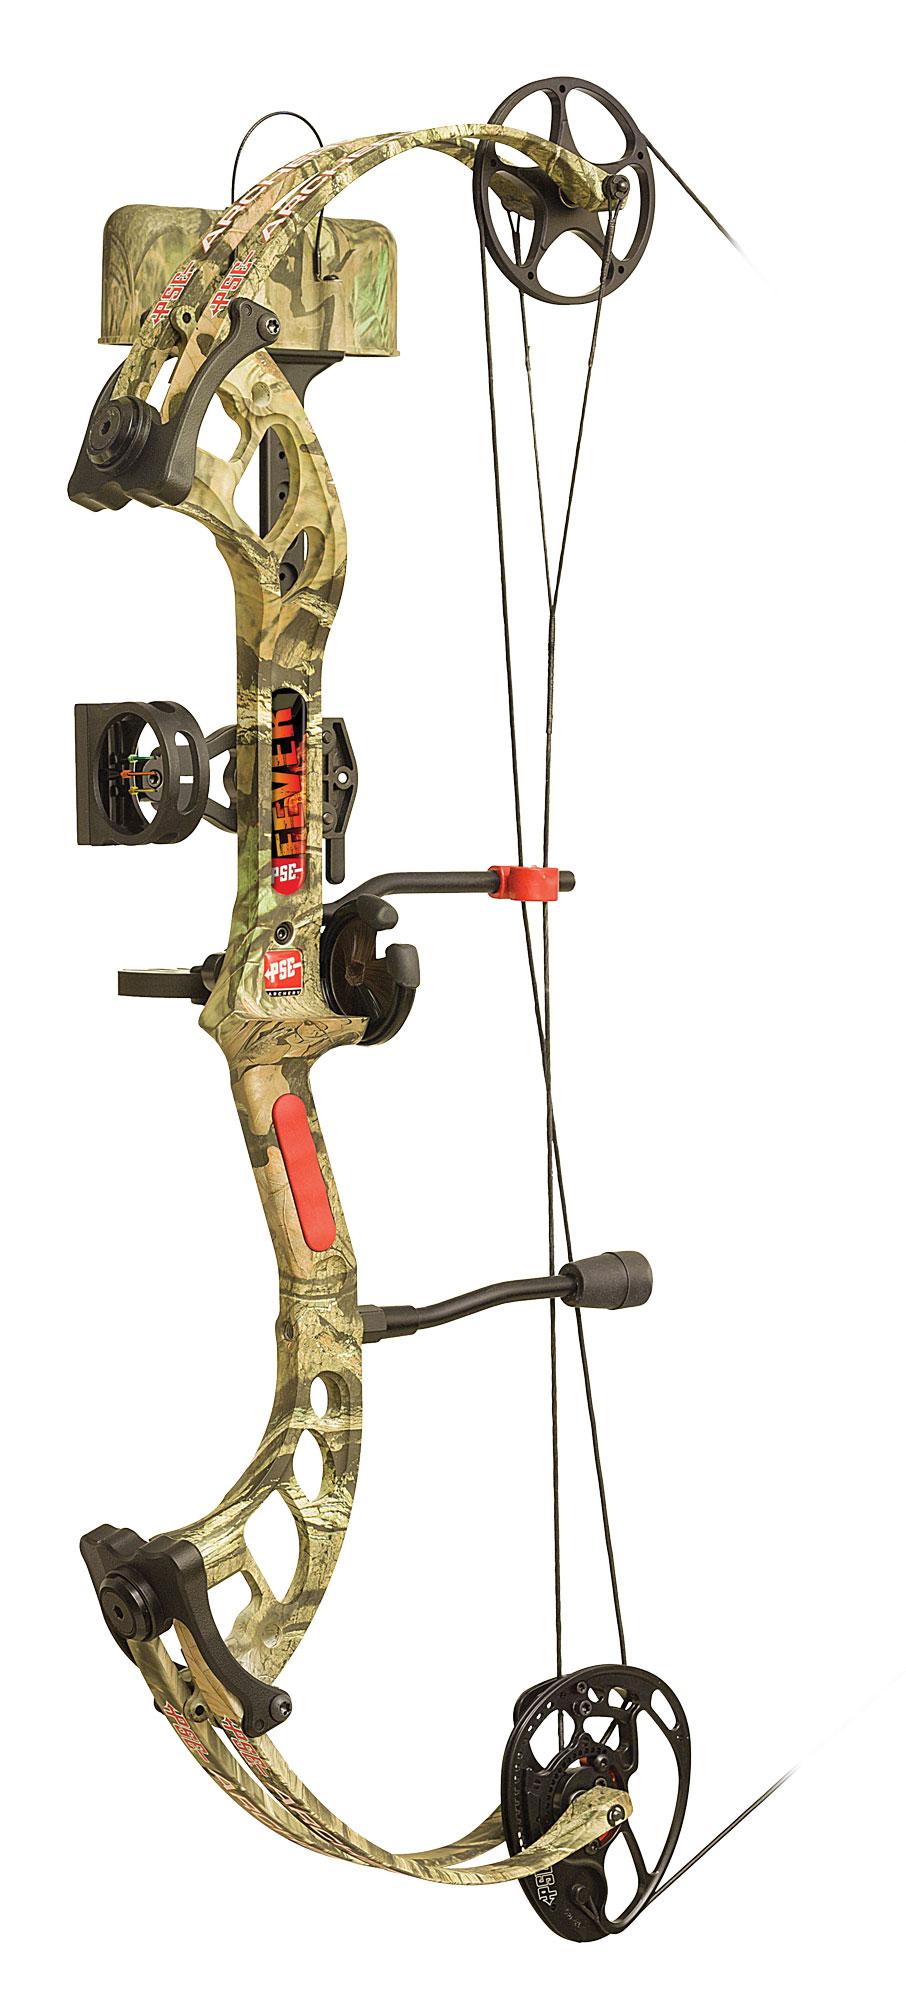 pse compound bow serial numbers